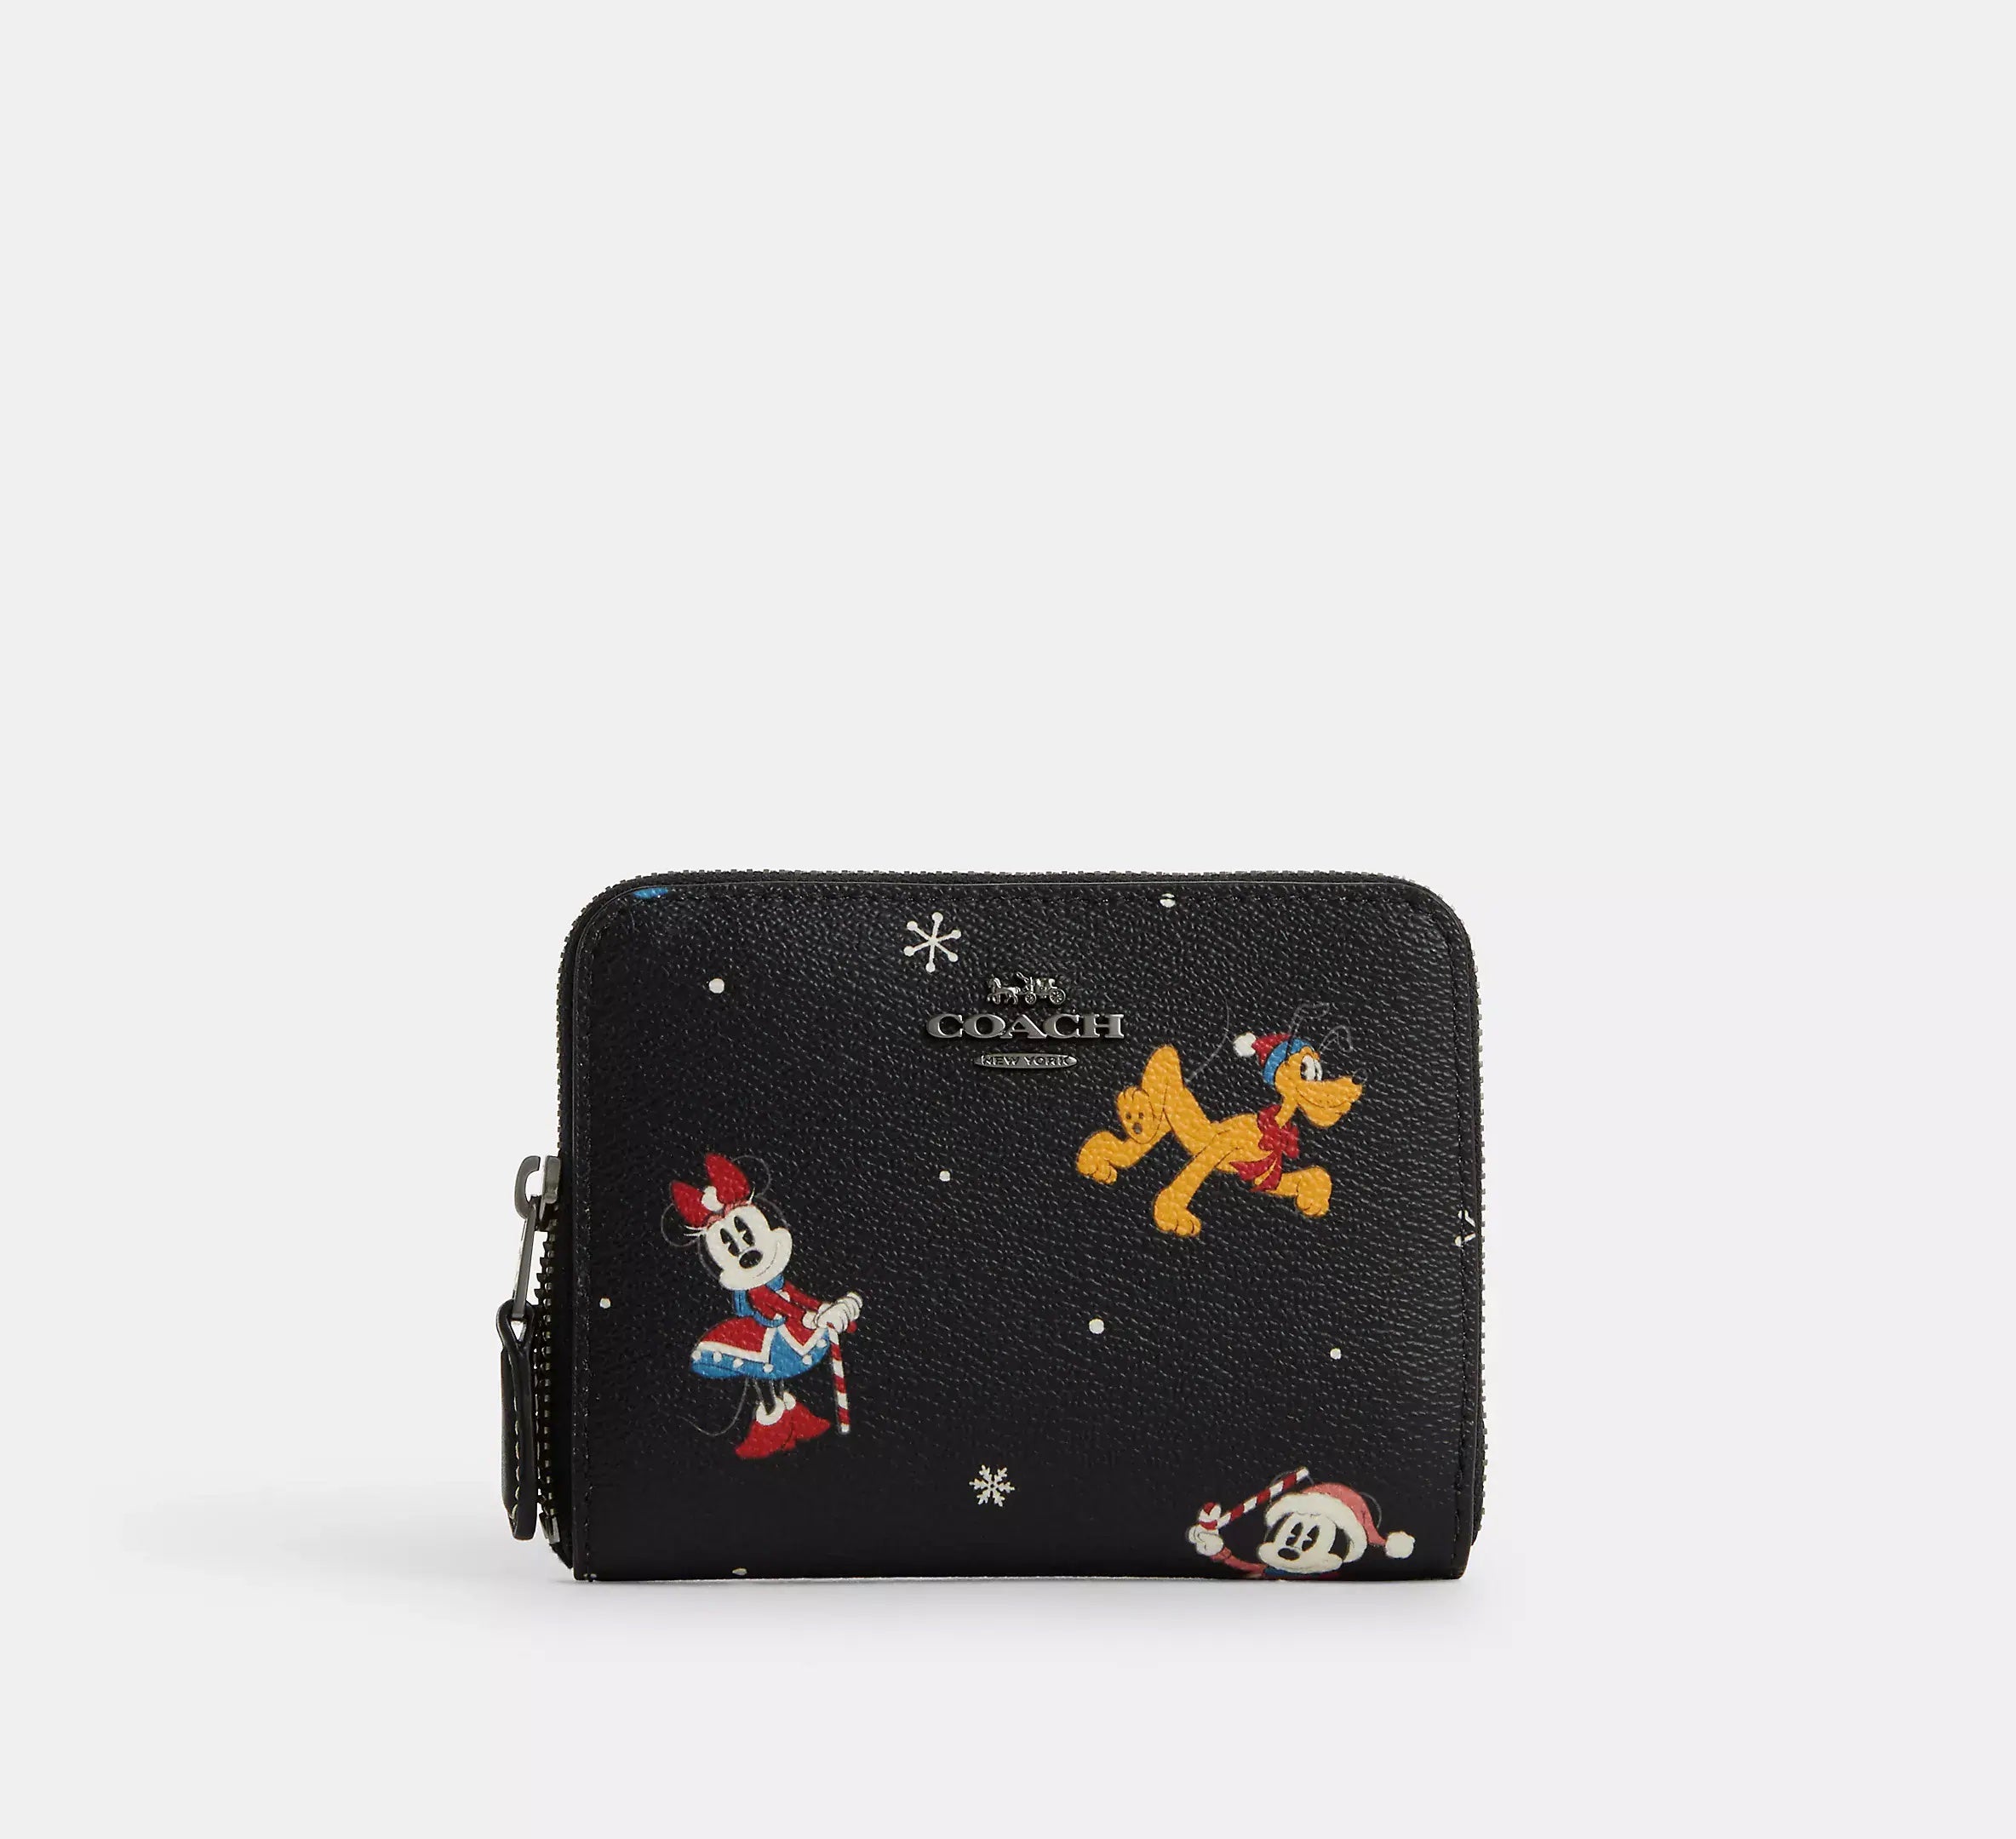 The Disney x Coach Holiday Collection: Shop Holiday Gifts for the 